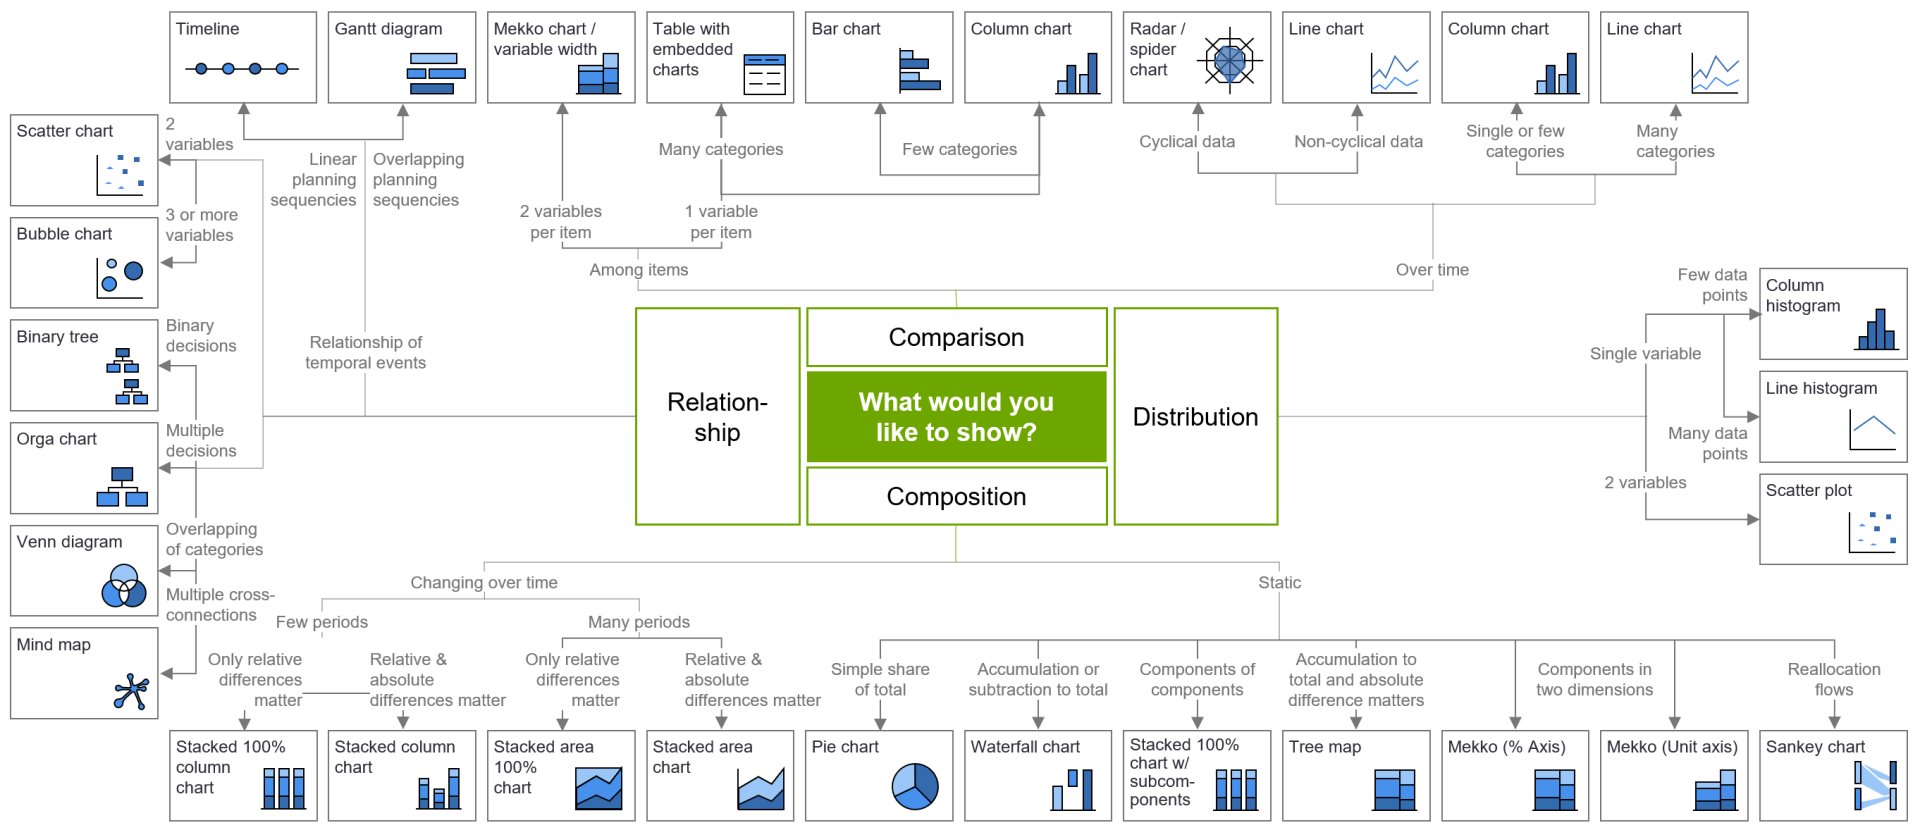 Chart decision tree depicting which chart suits what kind of data.